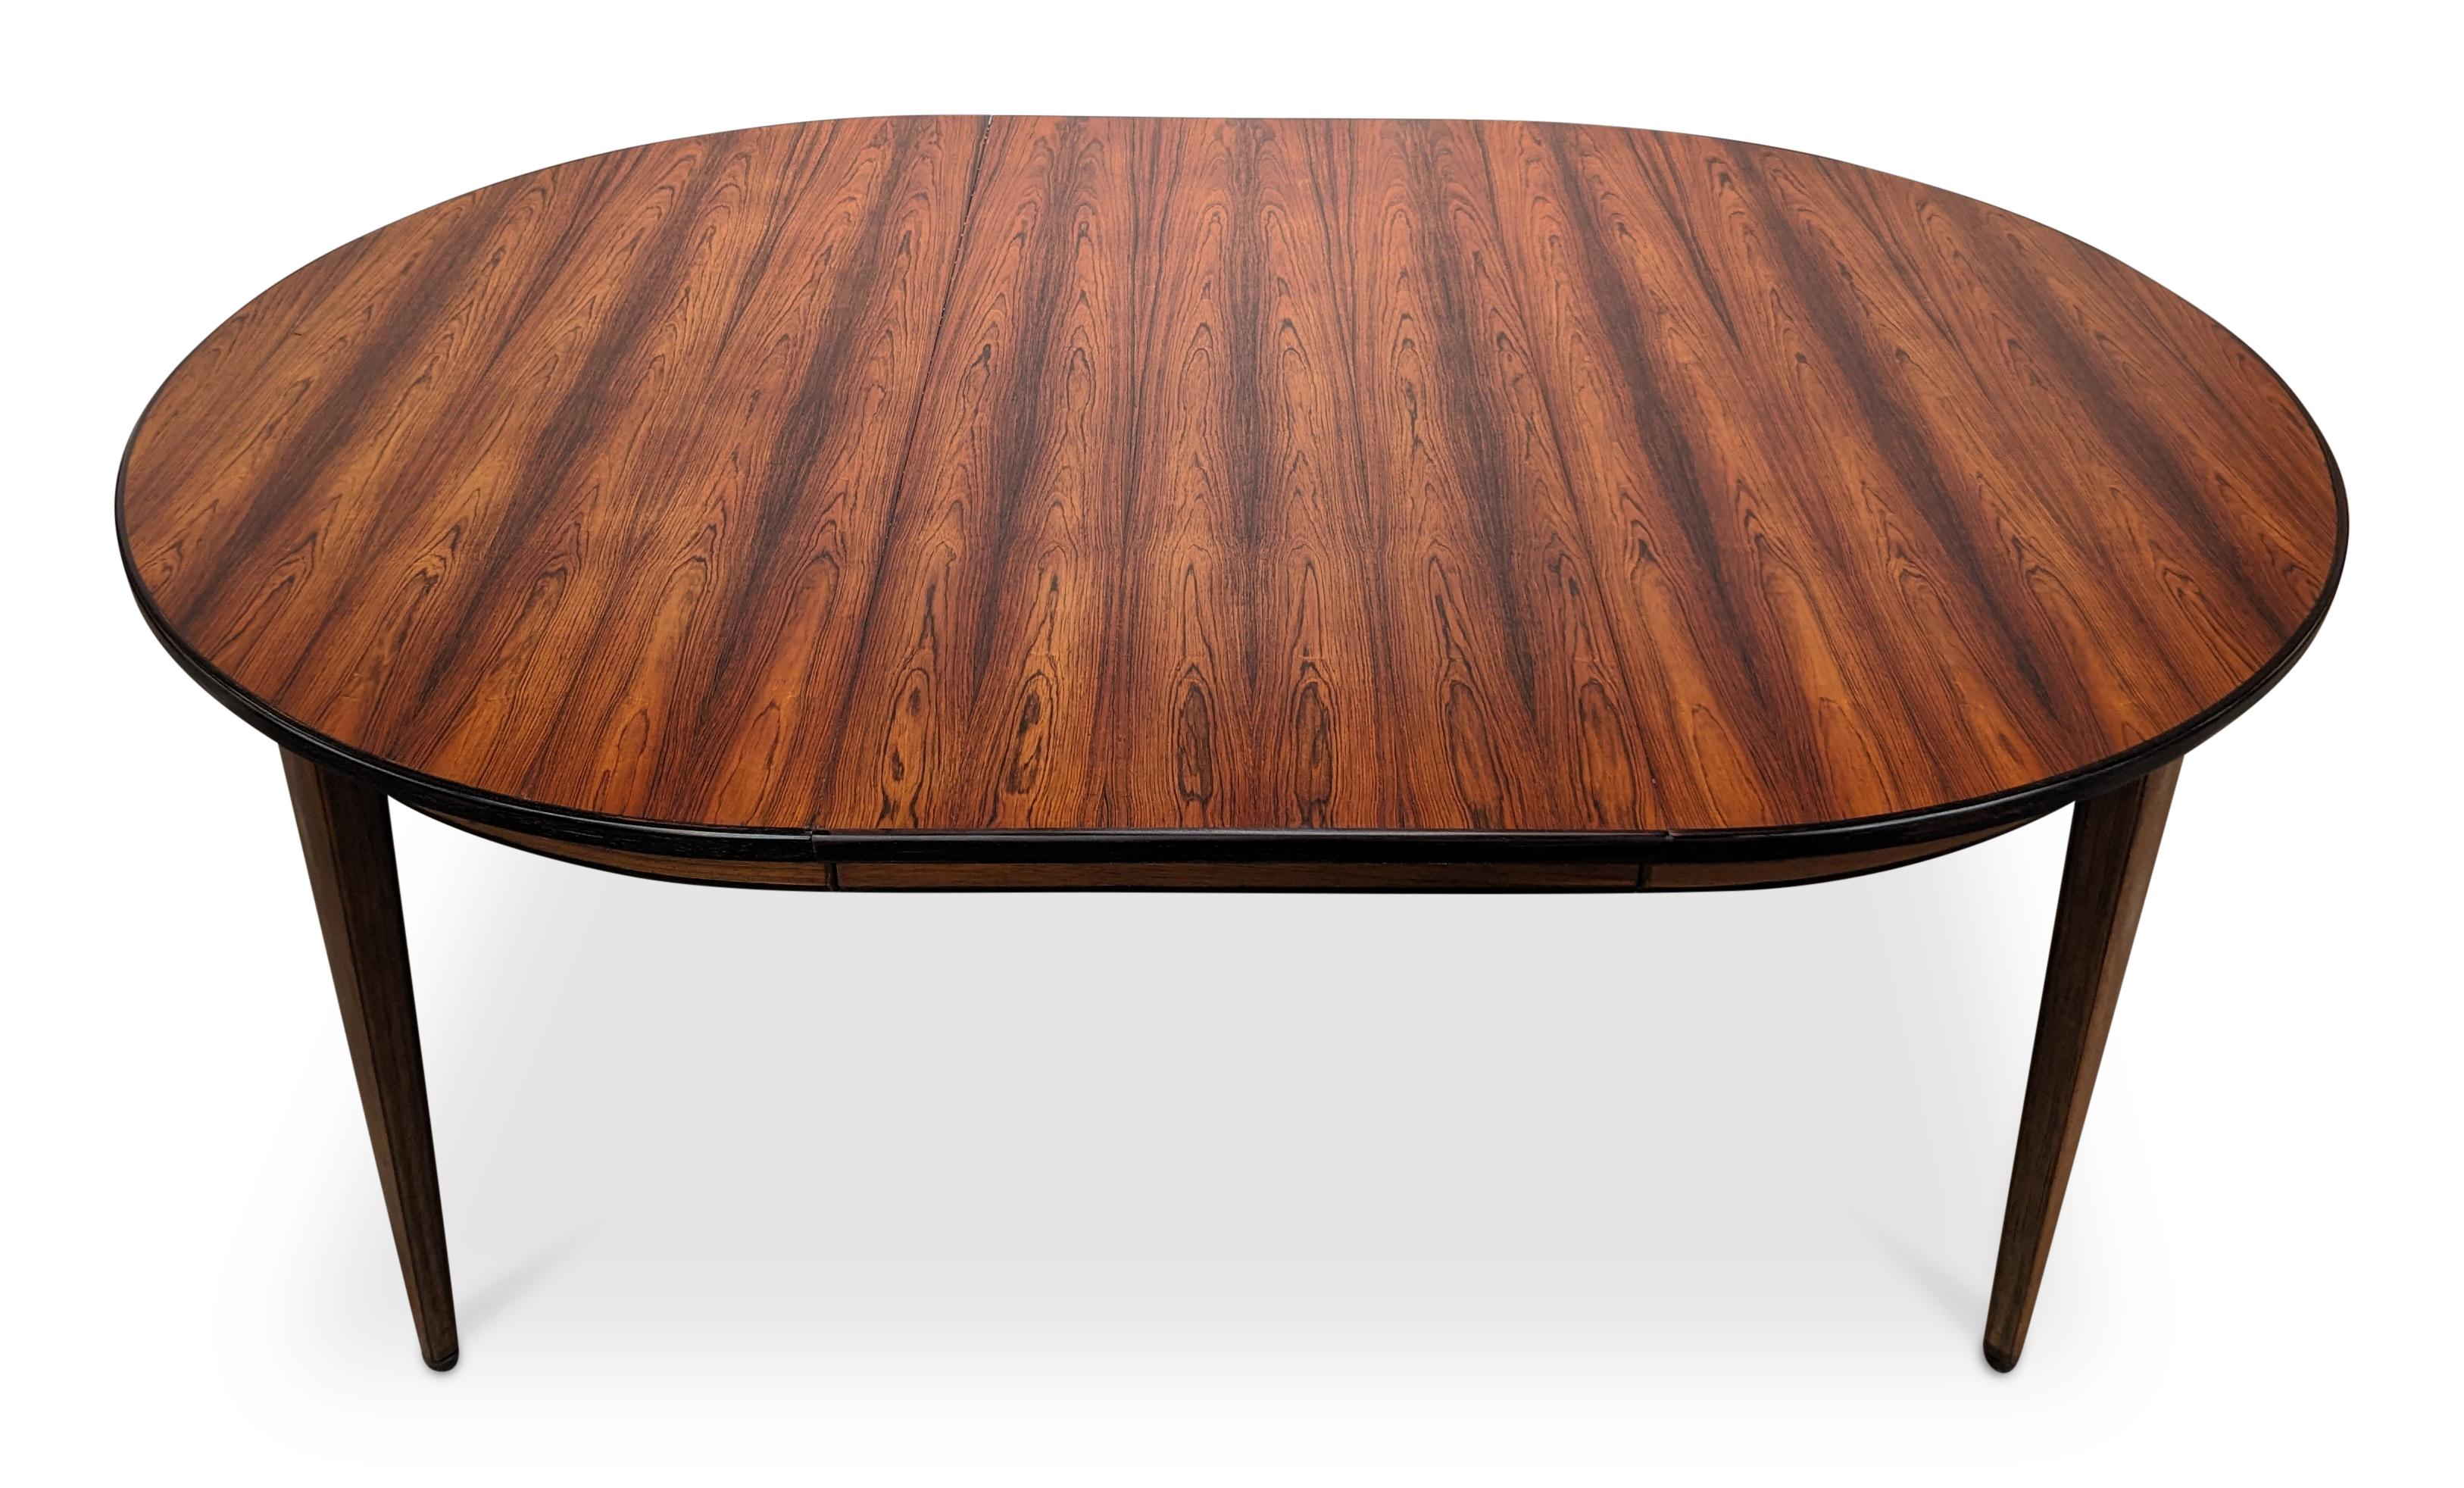 Omann Jun Round Rosewood Table w 1 Leaf - 022433 Vintage Danish Mid Century In Good Condition In Jersey City, NJ